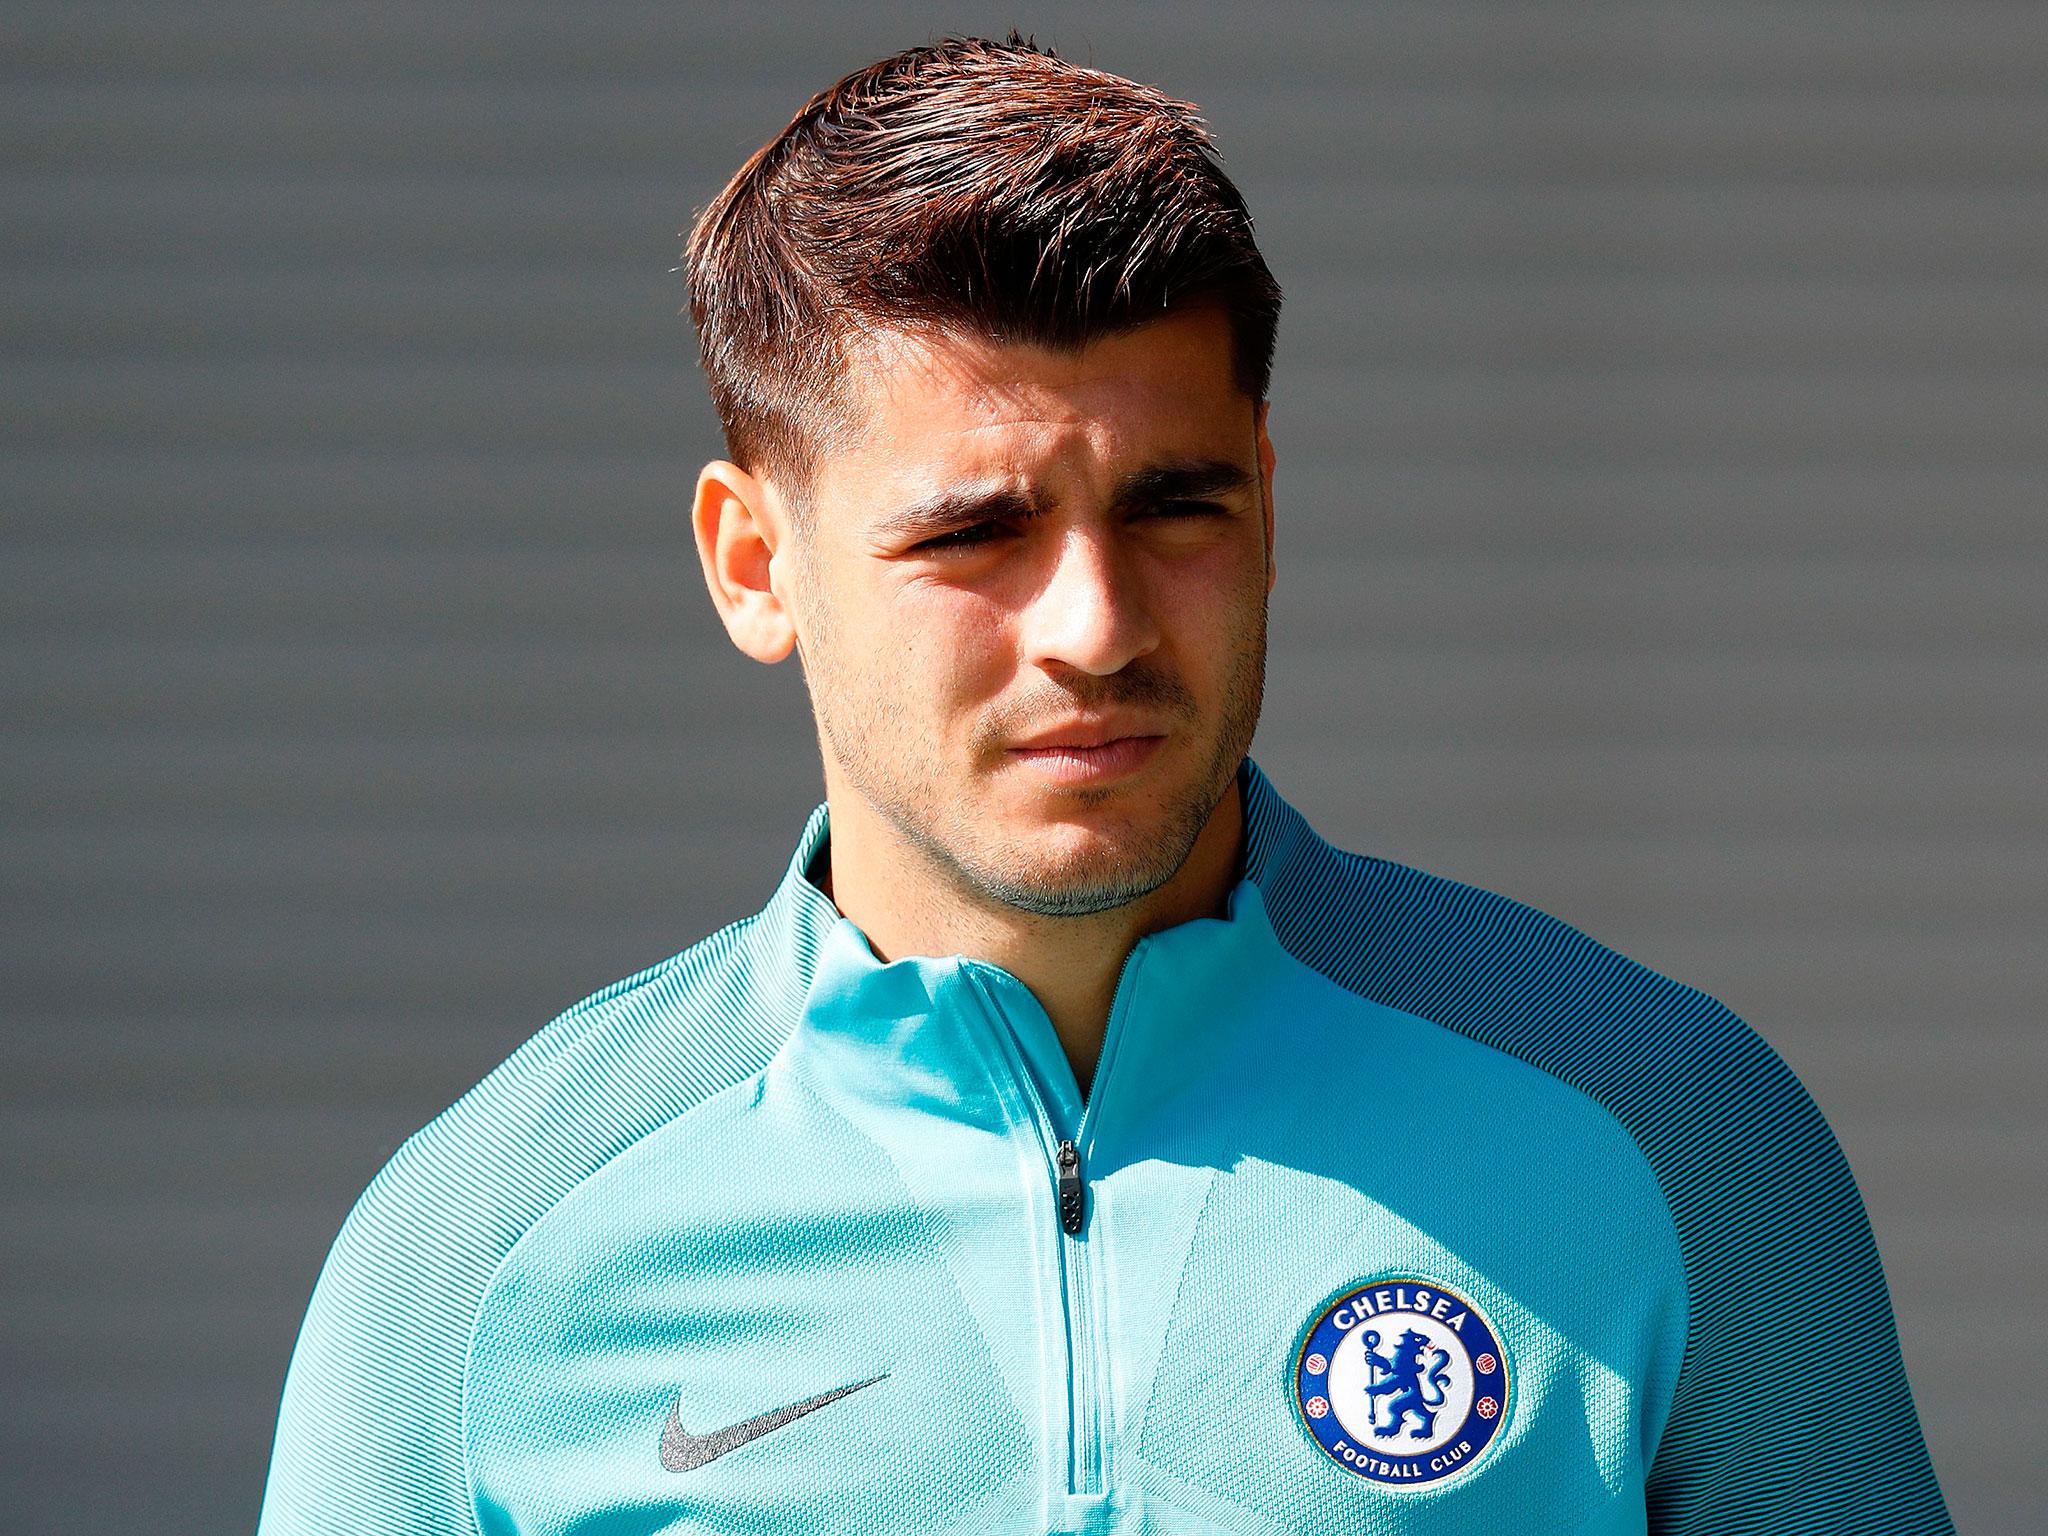 Chelsea will conduct their own tests once the striker returns from Spain